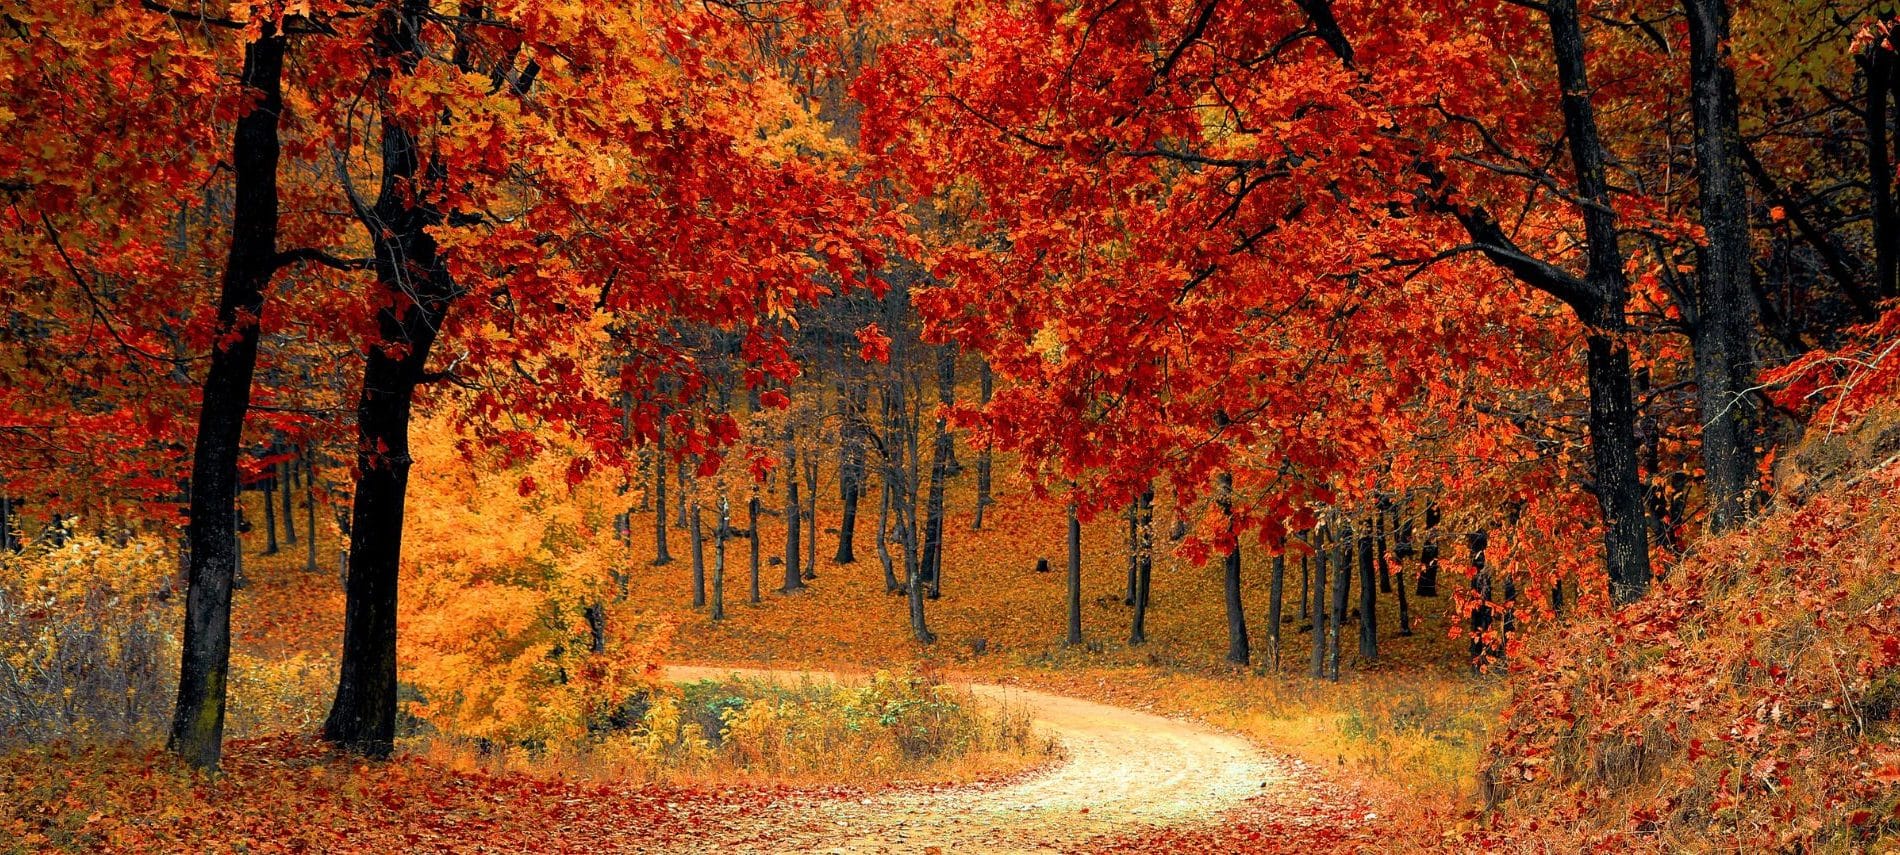 A dirt road winding through a forest of red and yellow trees.